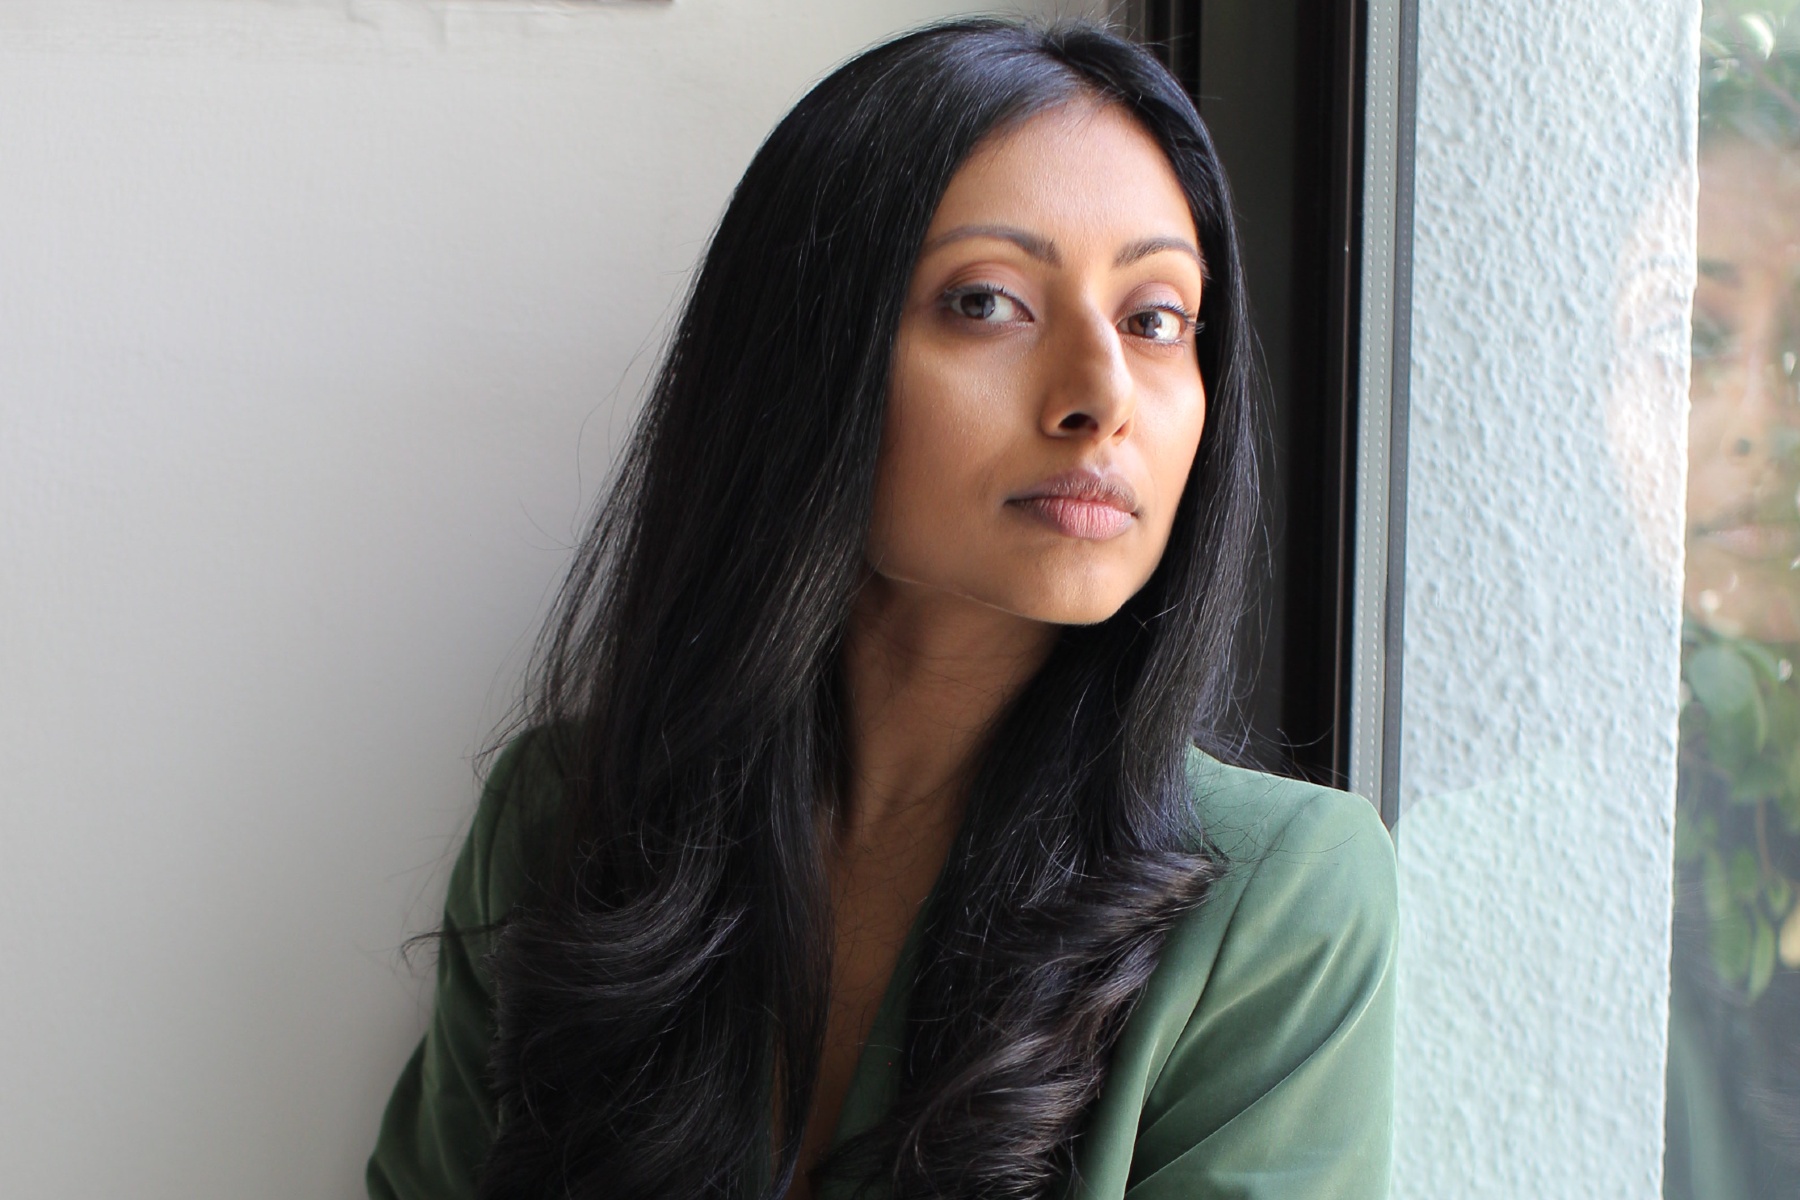 Frontlist Author | Booker shortlist announced Avni Doshi makes it, Hilary Mantel misses out